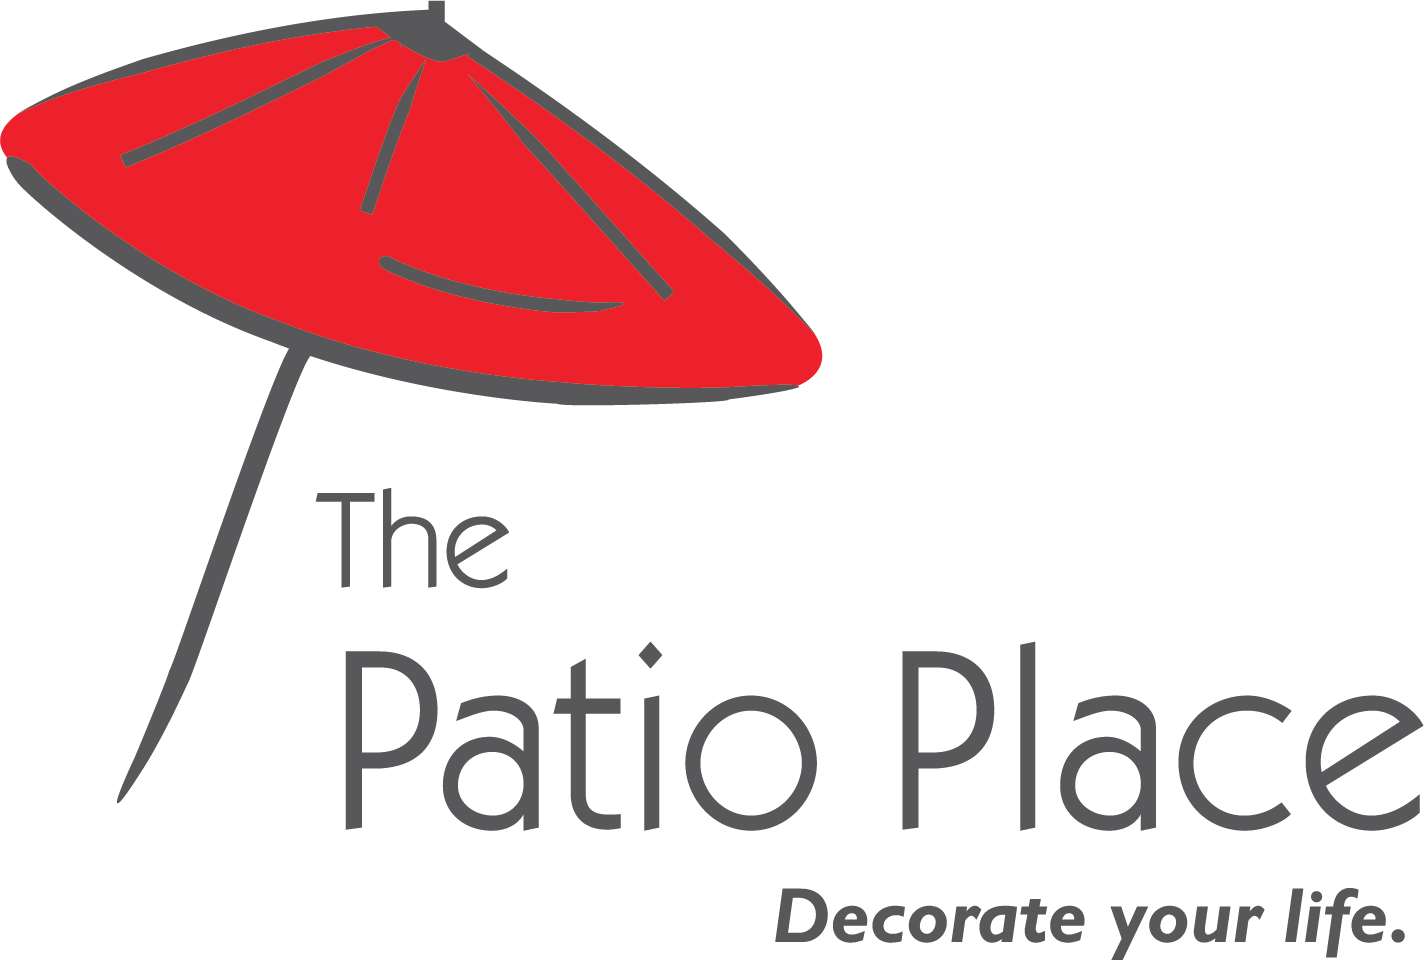 The Patio Place Outdoor Furniture Palm Desert Ca